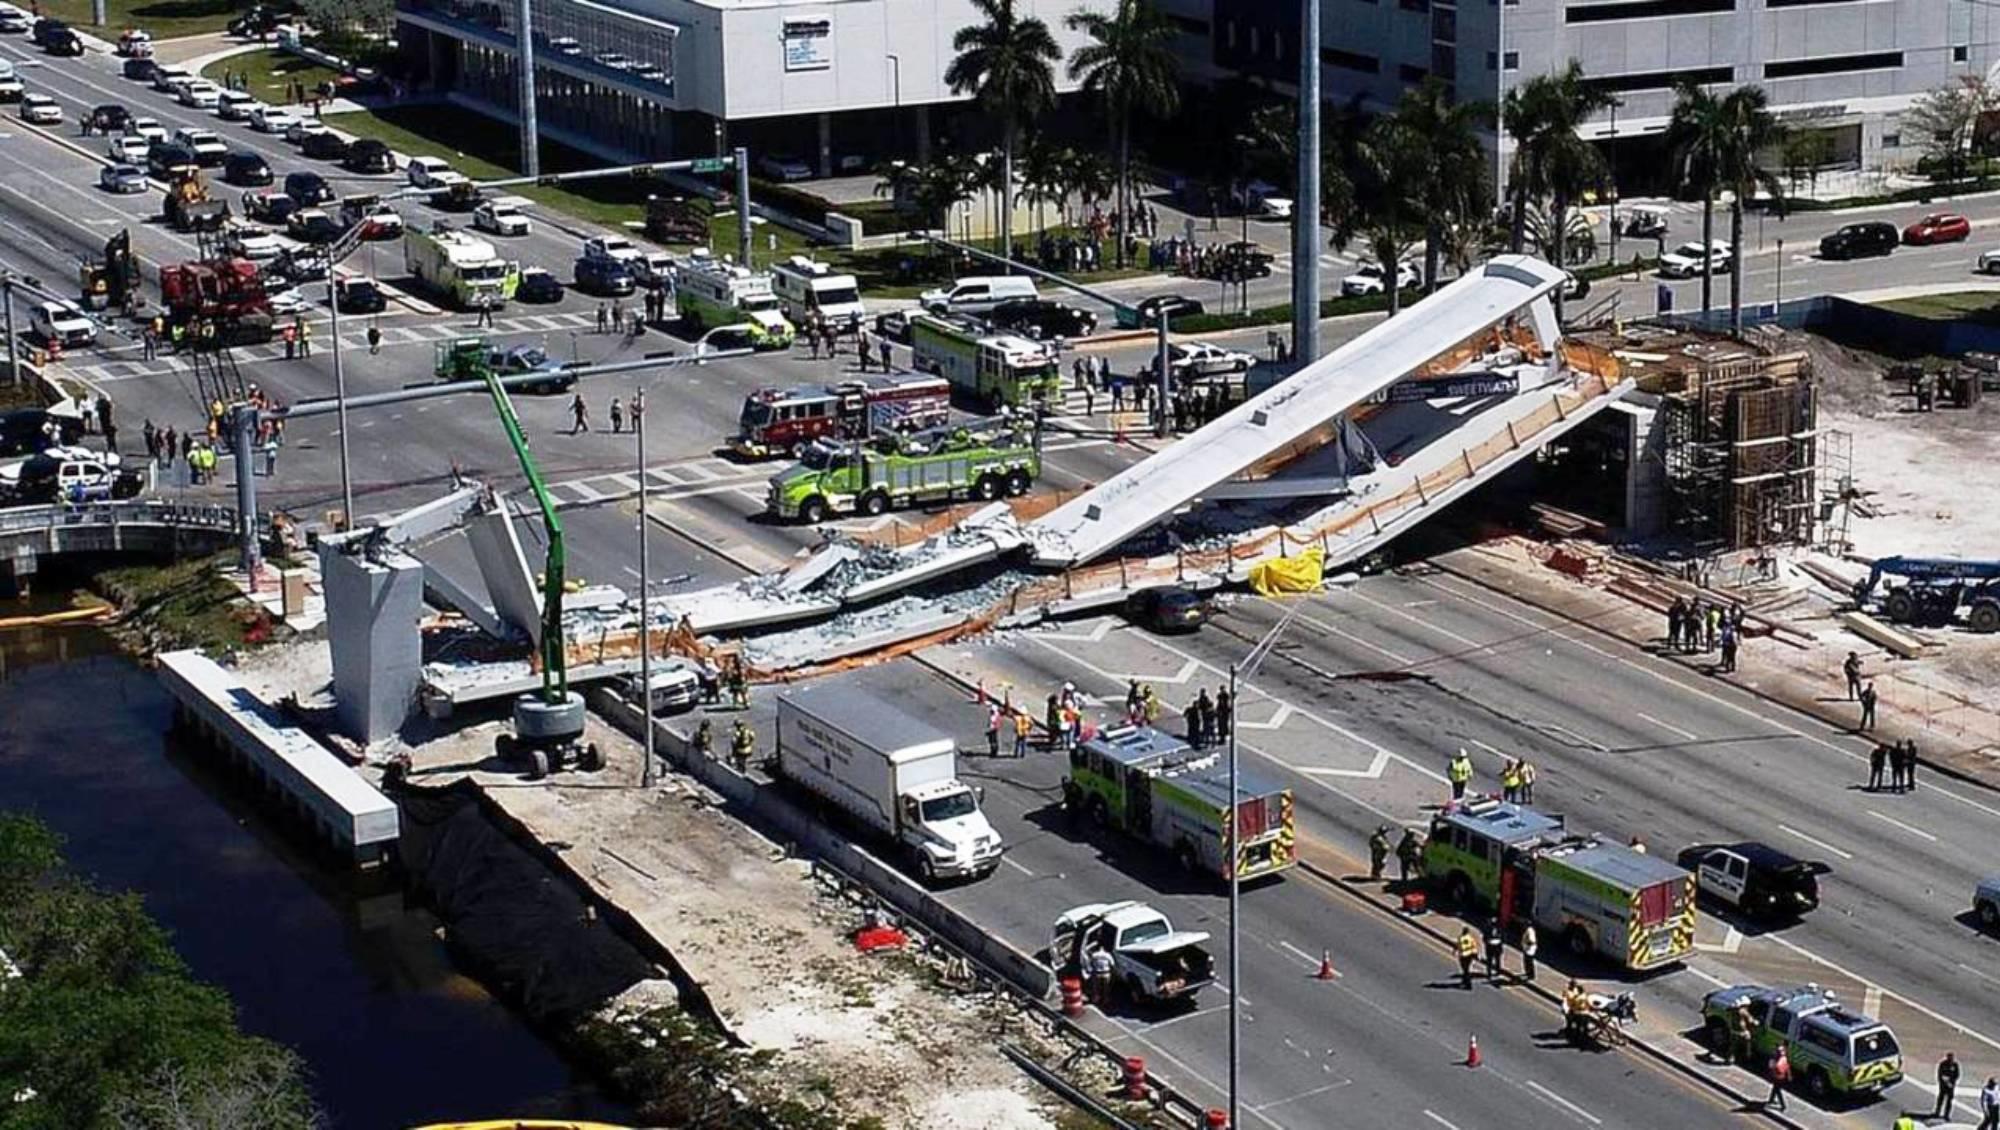 FIU pedestrian bridge collapsed March 15, 2018, and killed six people (Credit: Miami Herald)